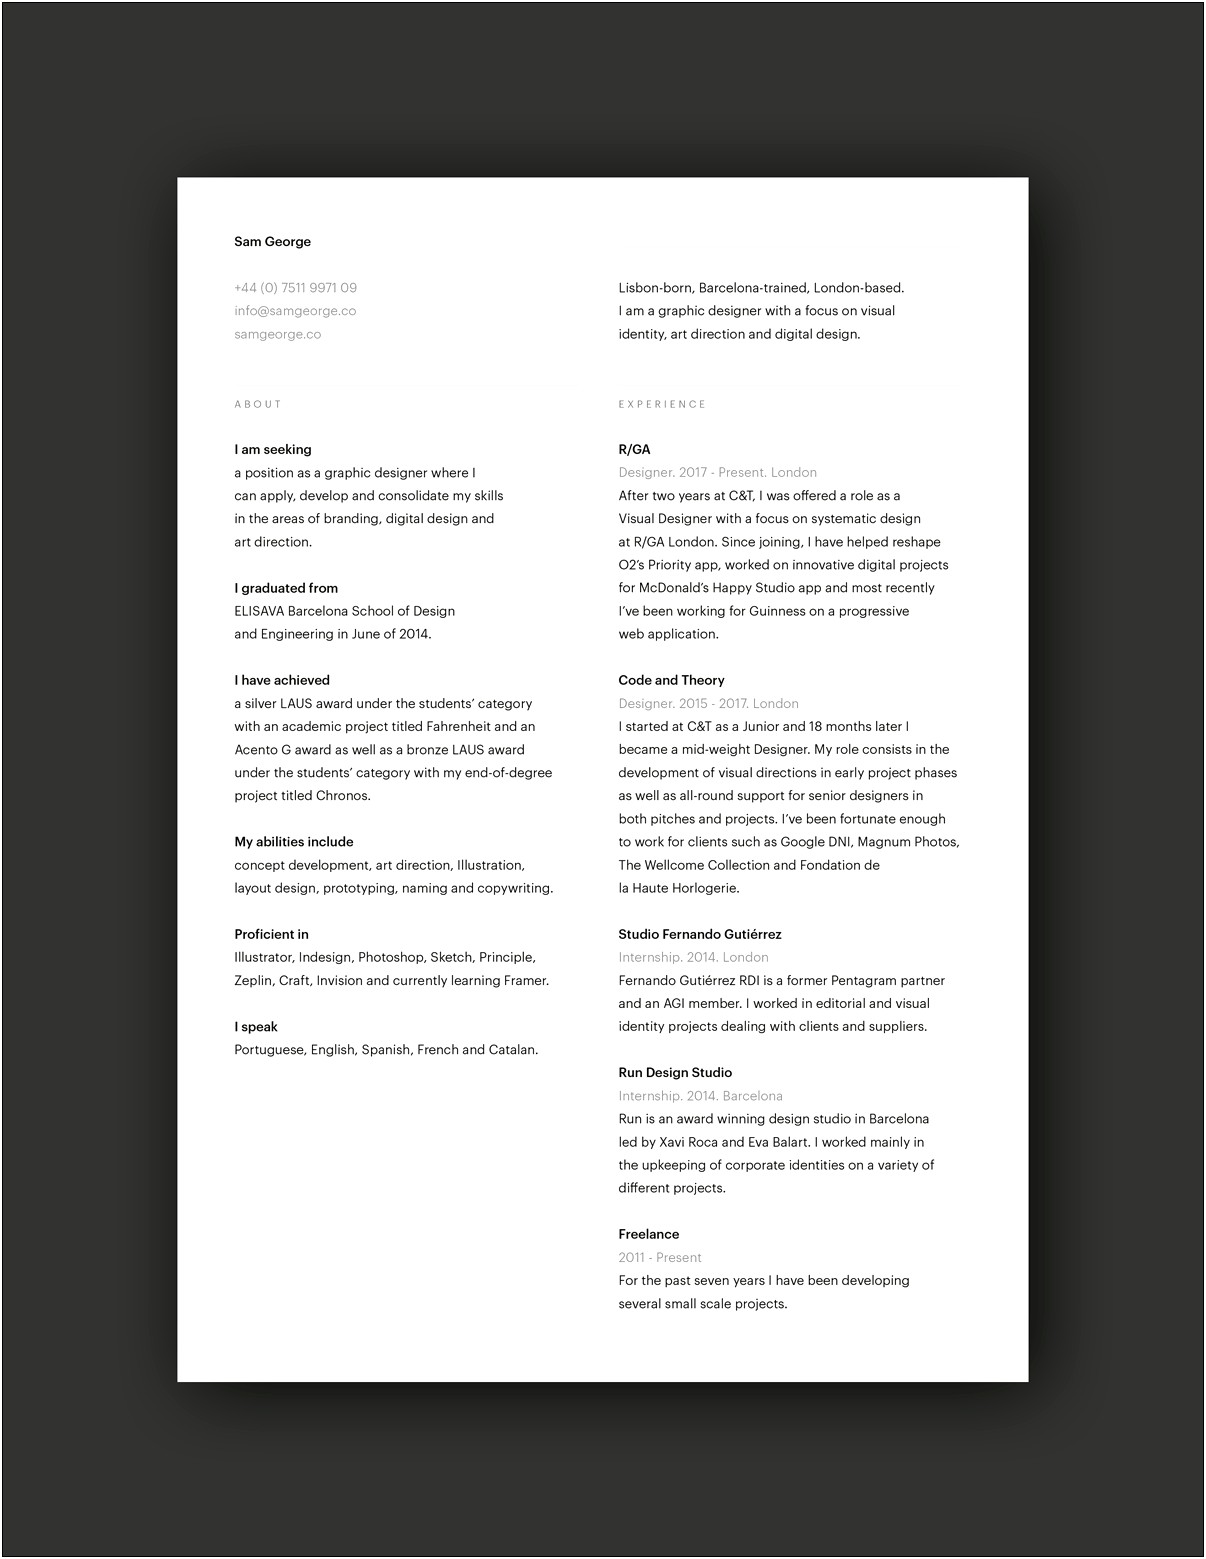 Project Description For Ecommerce Website In Resume